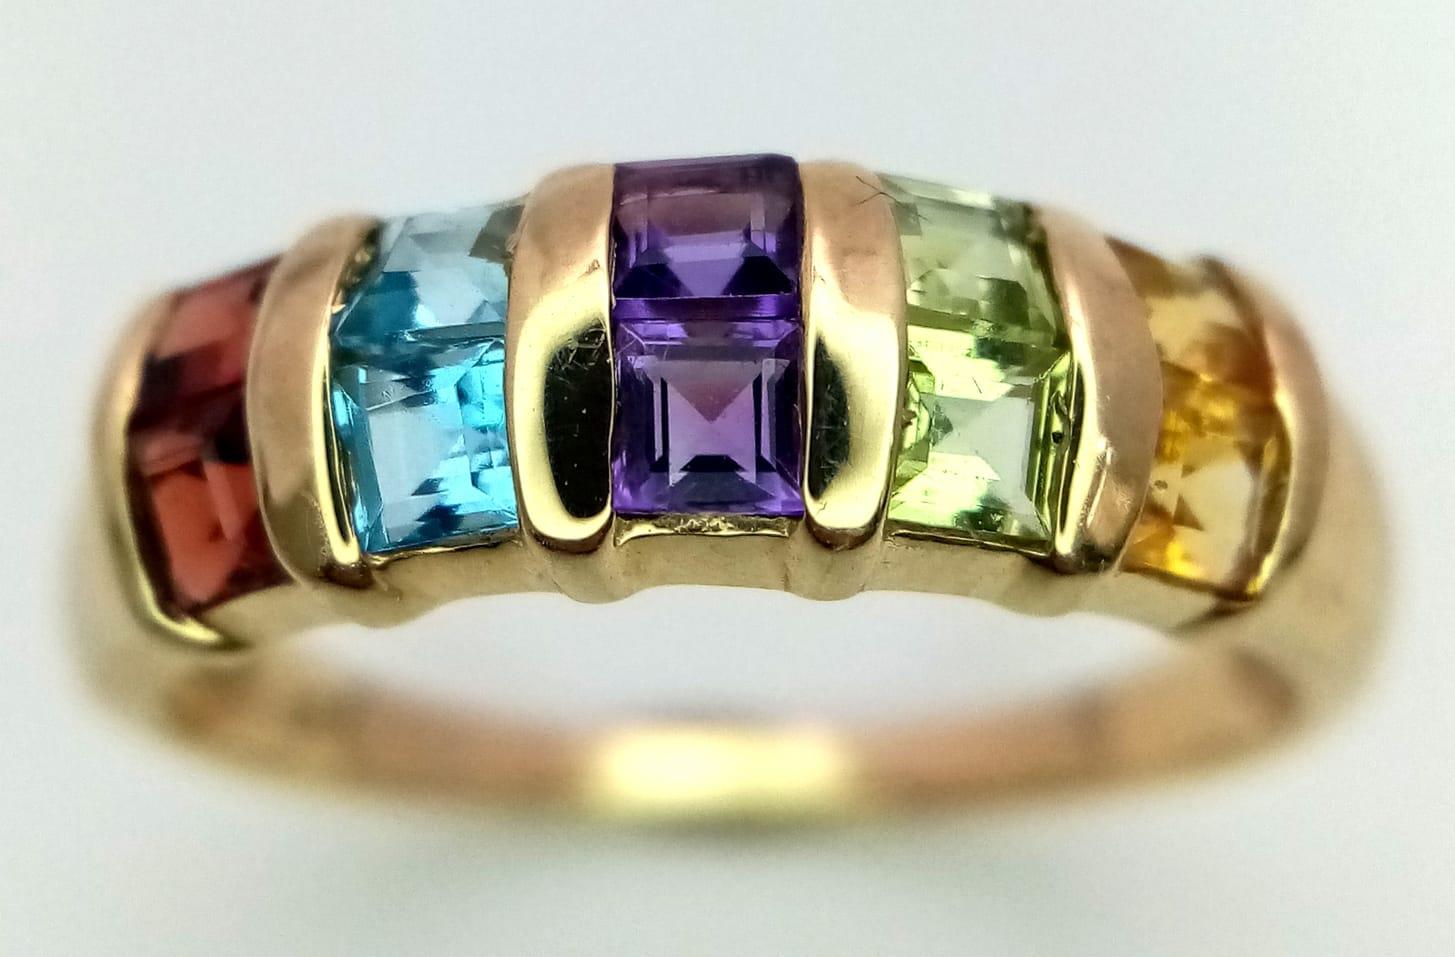 A 9K YELLOW GOLD GEM SET RING. Includes peridot, garnet, topaz, amethyst and citrine. Size P, 2.4g - Image 2 of 4